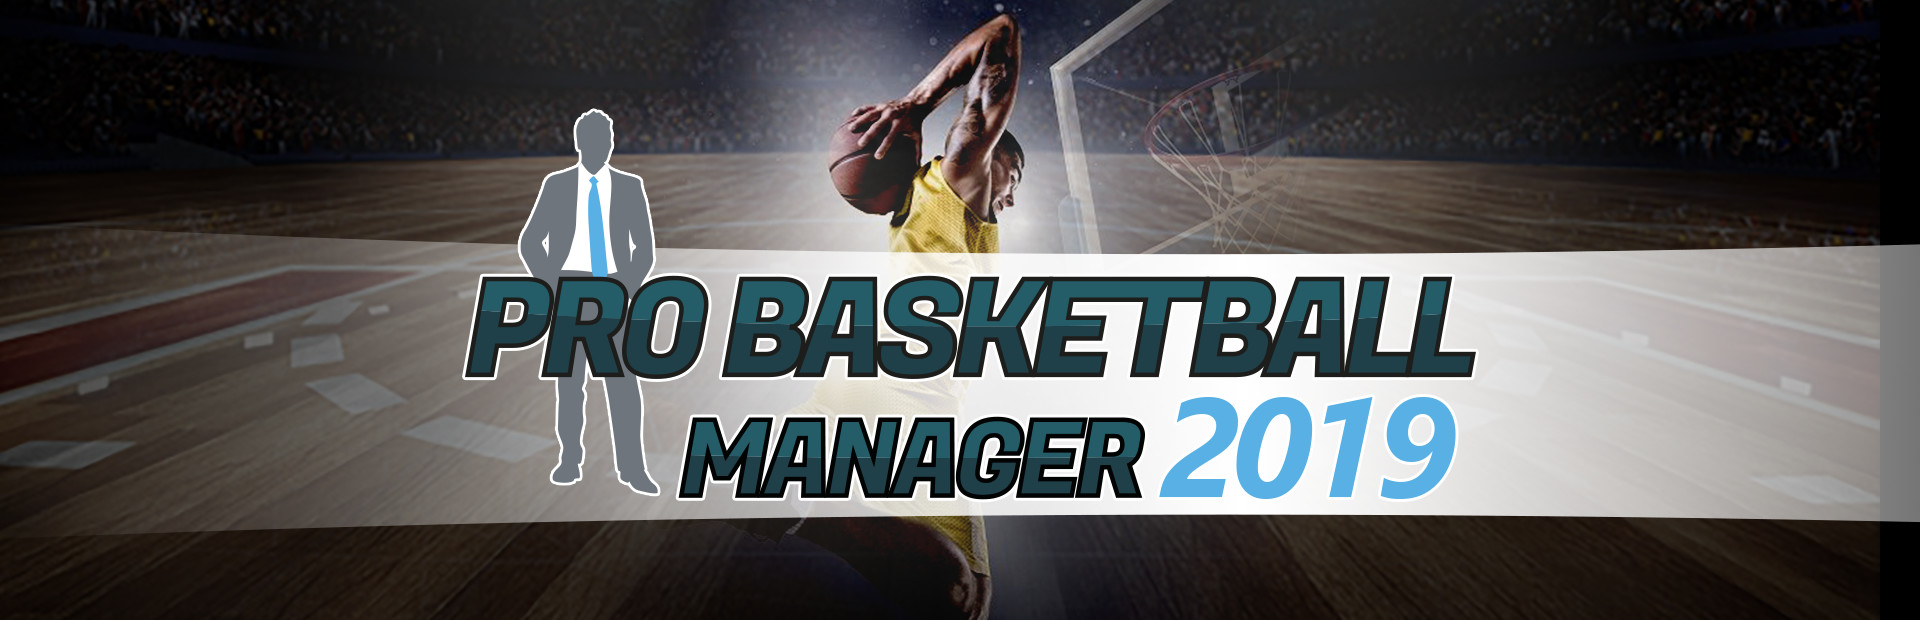 Pro Basketball Manager 2019 cover image